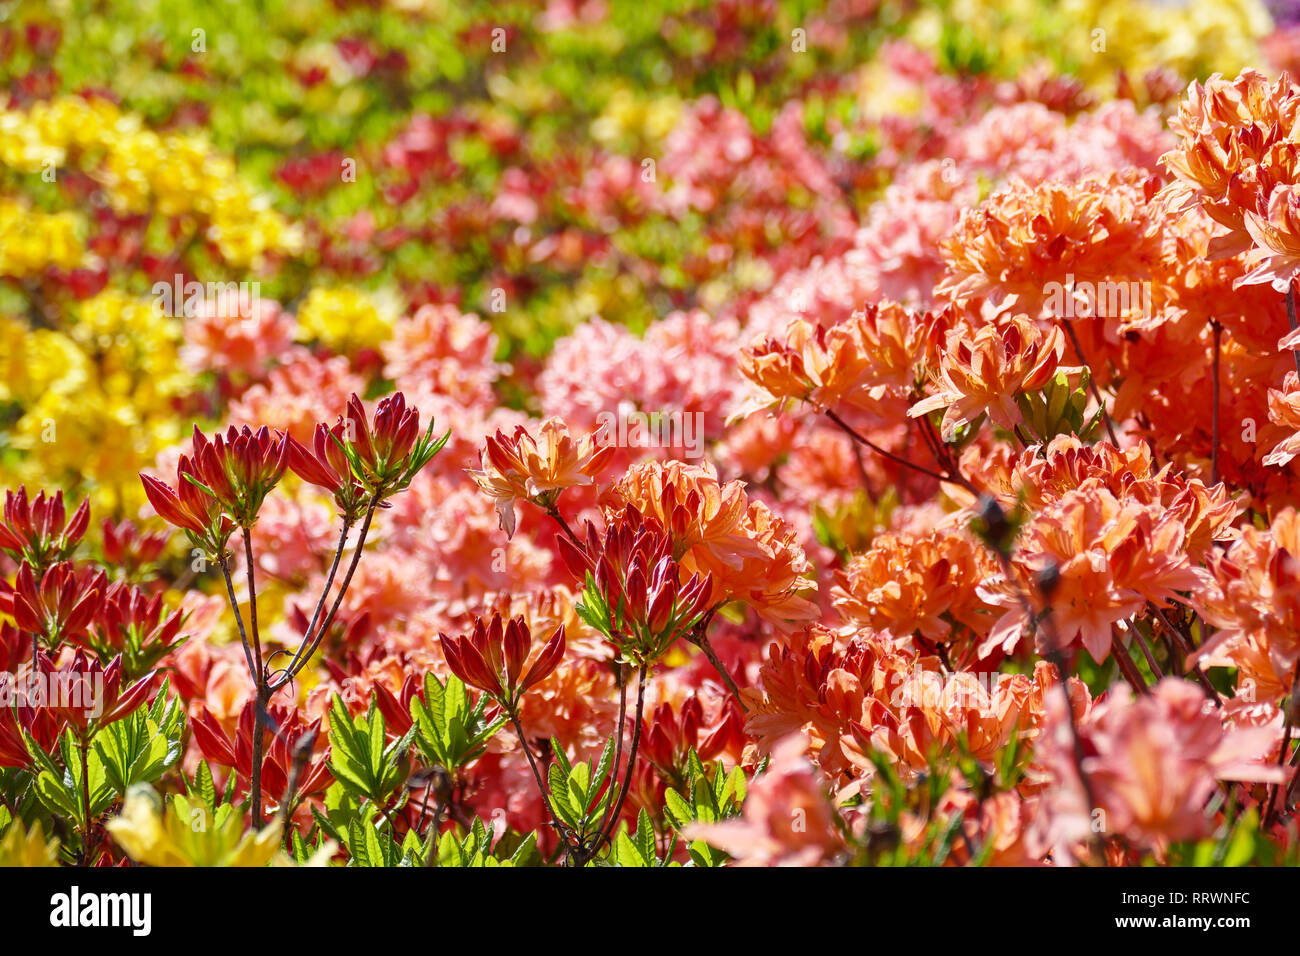 Blooming flowers of rhododendron - pink, red, yellow. Floral background. Stock Photo